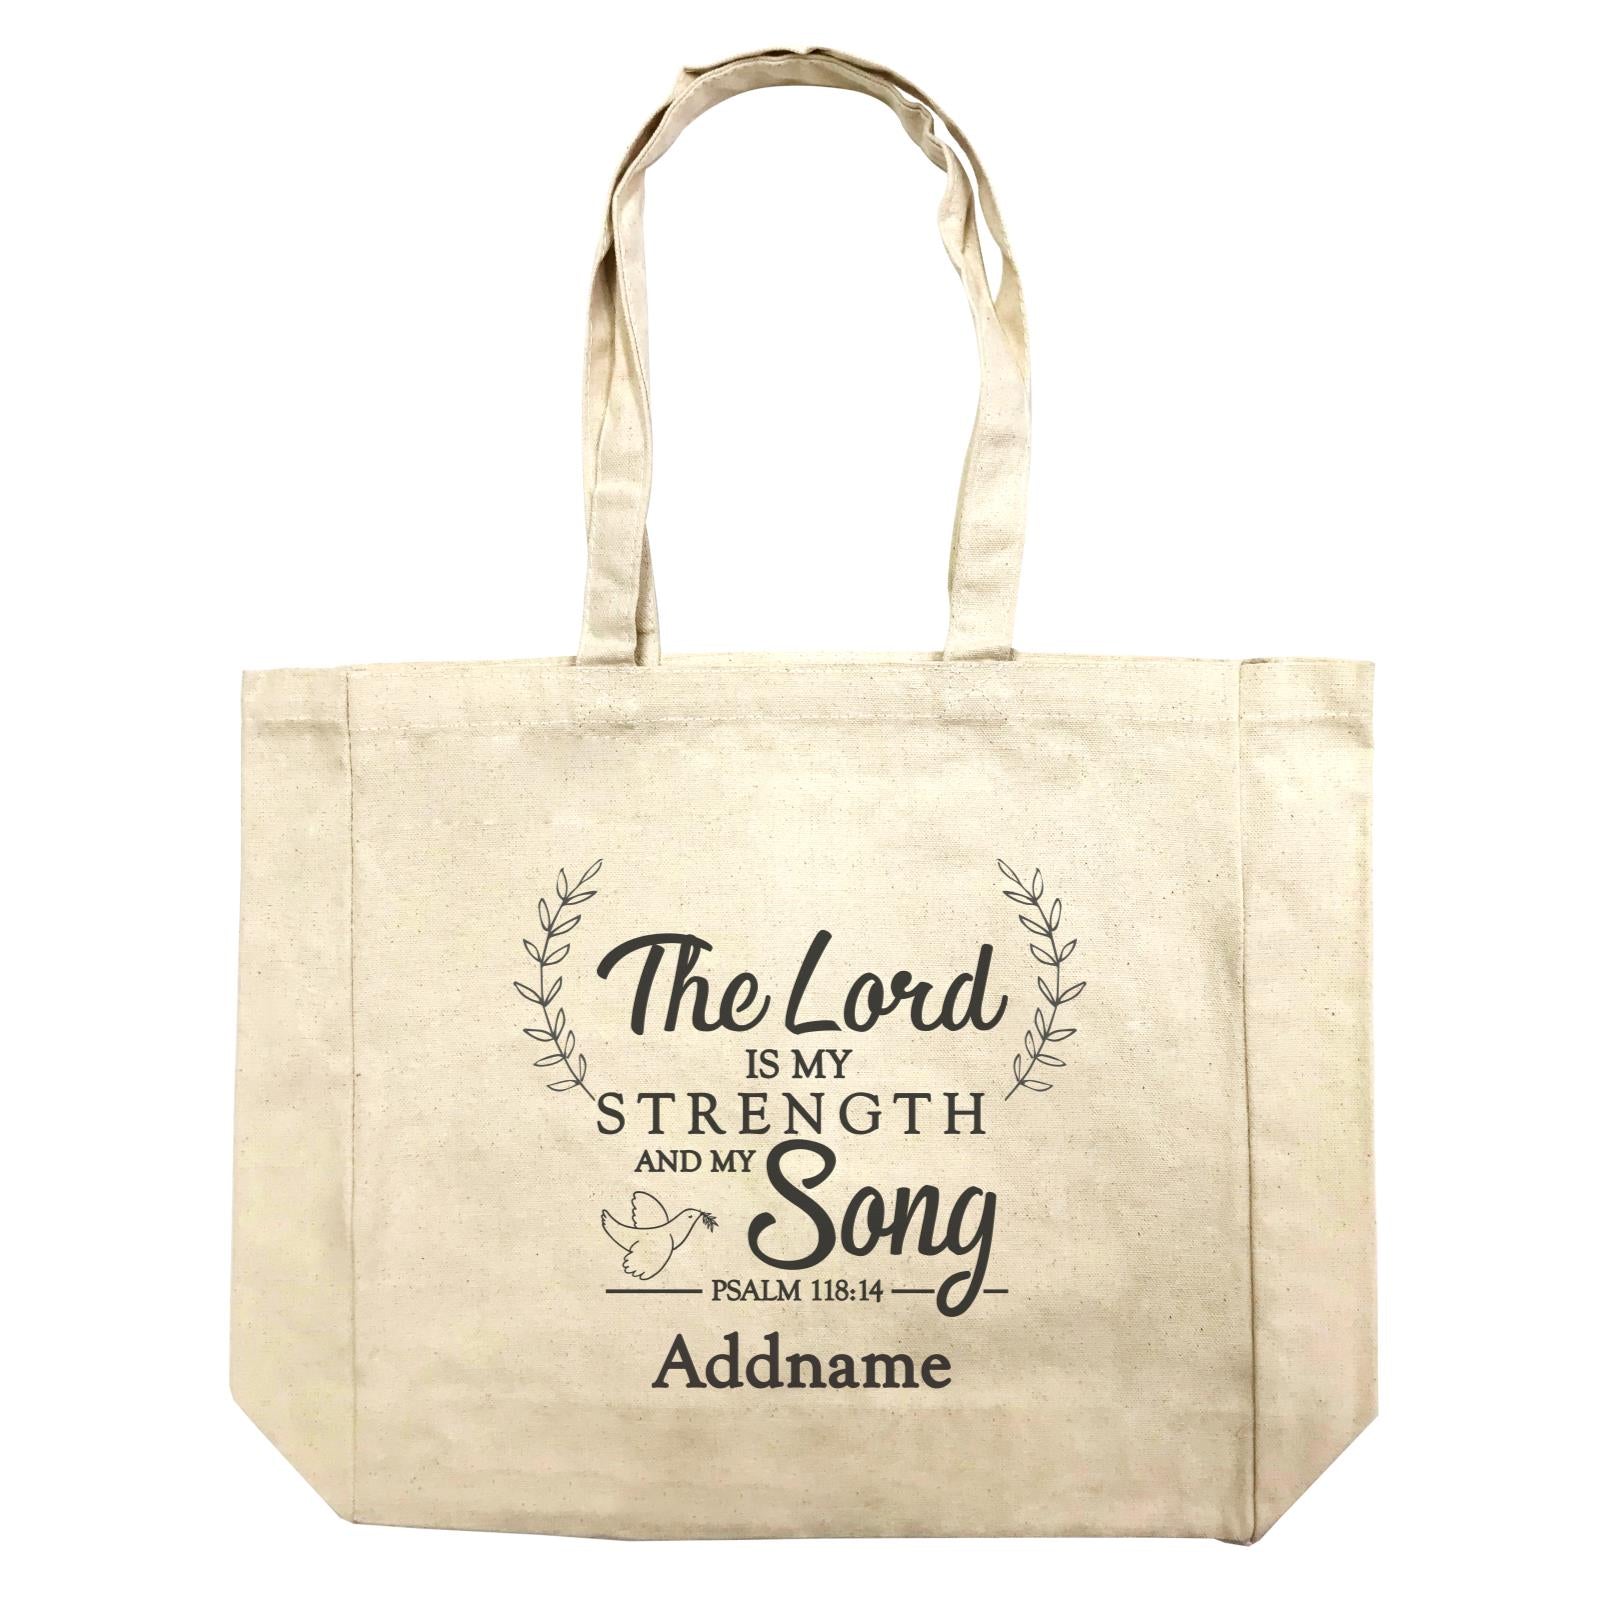 Christian Series The Lord Is My Strength Song Psalm 118.14 Addname Shopping Bag